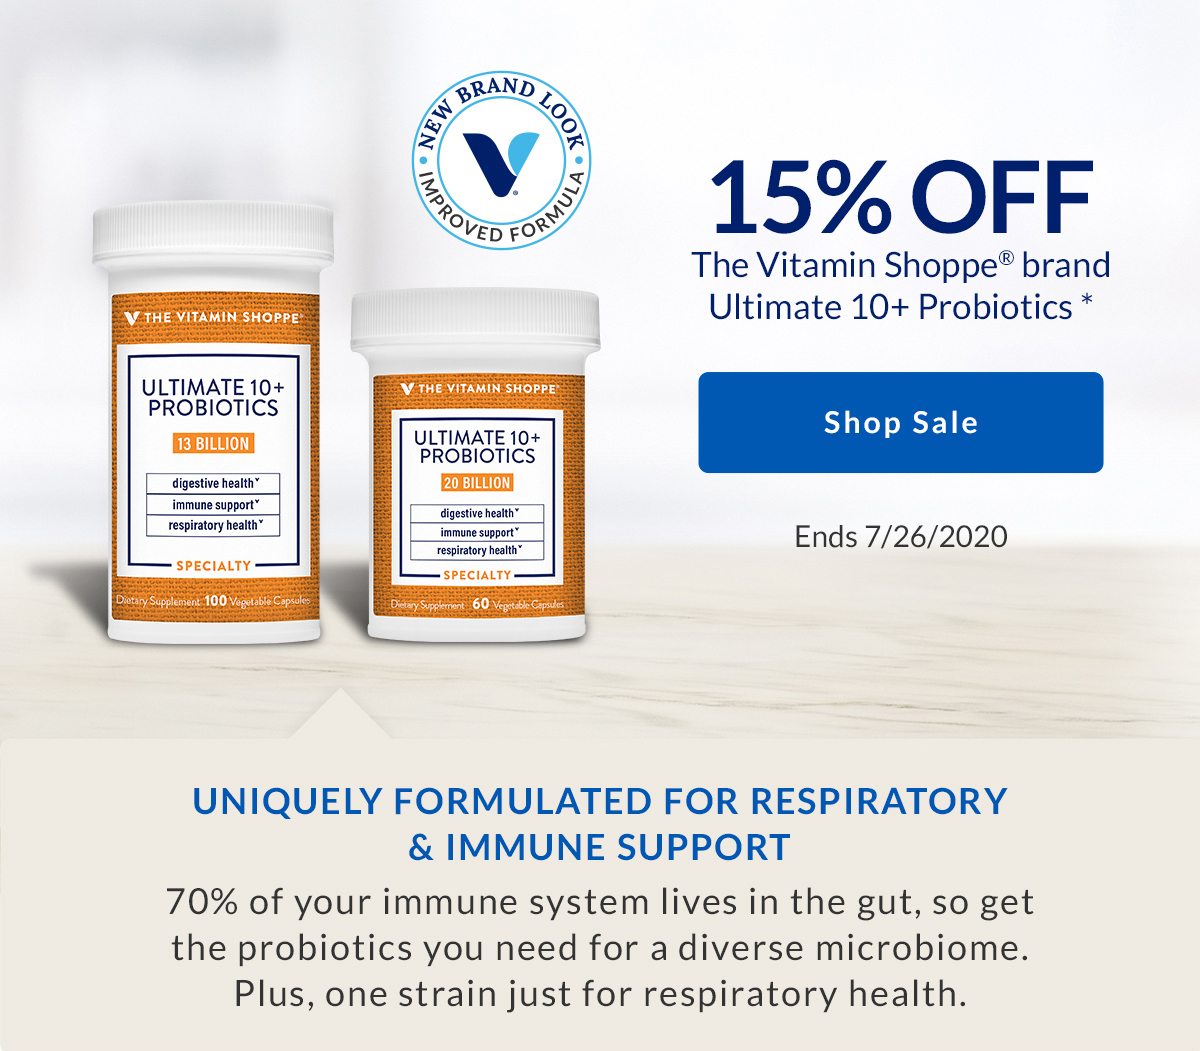 15% OFF The Vitamin Shoppe brand Ultimate 10+ Probiotics * | Shop Sale | Ends 7/26/2020 | UNIQUELY FORMULATED FOR RESPIRATORY & IMMUNE SUPPORT | 70% of your immune system lives in the gut, so get the probiotics you need for a diverse microbiome. Plus, one strain just for respiratory health.